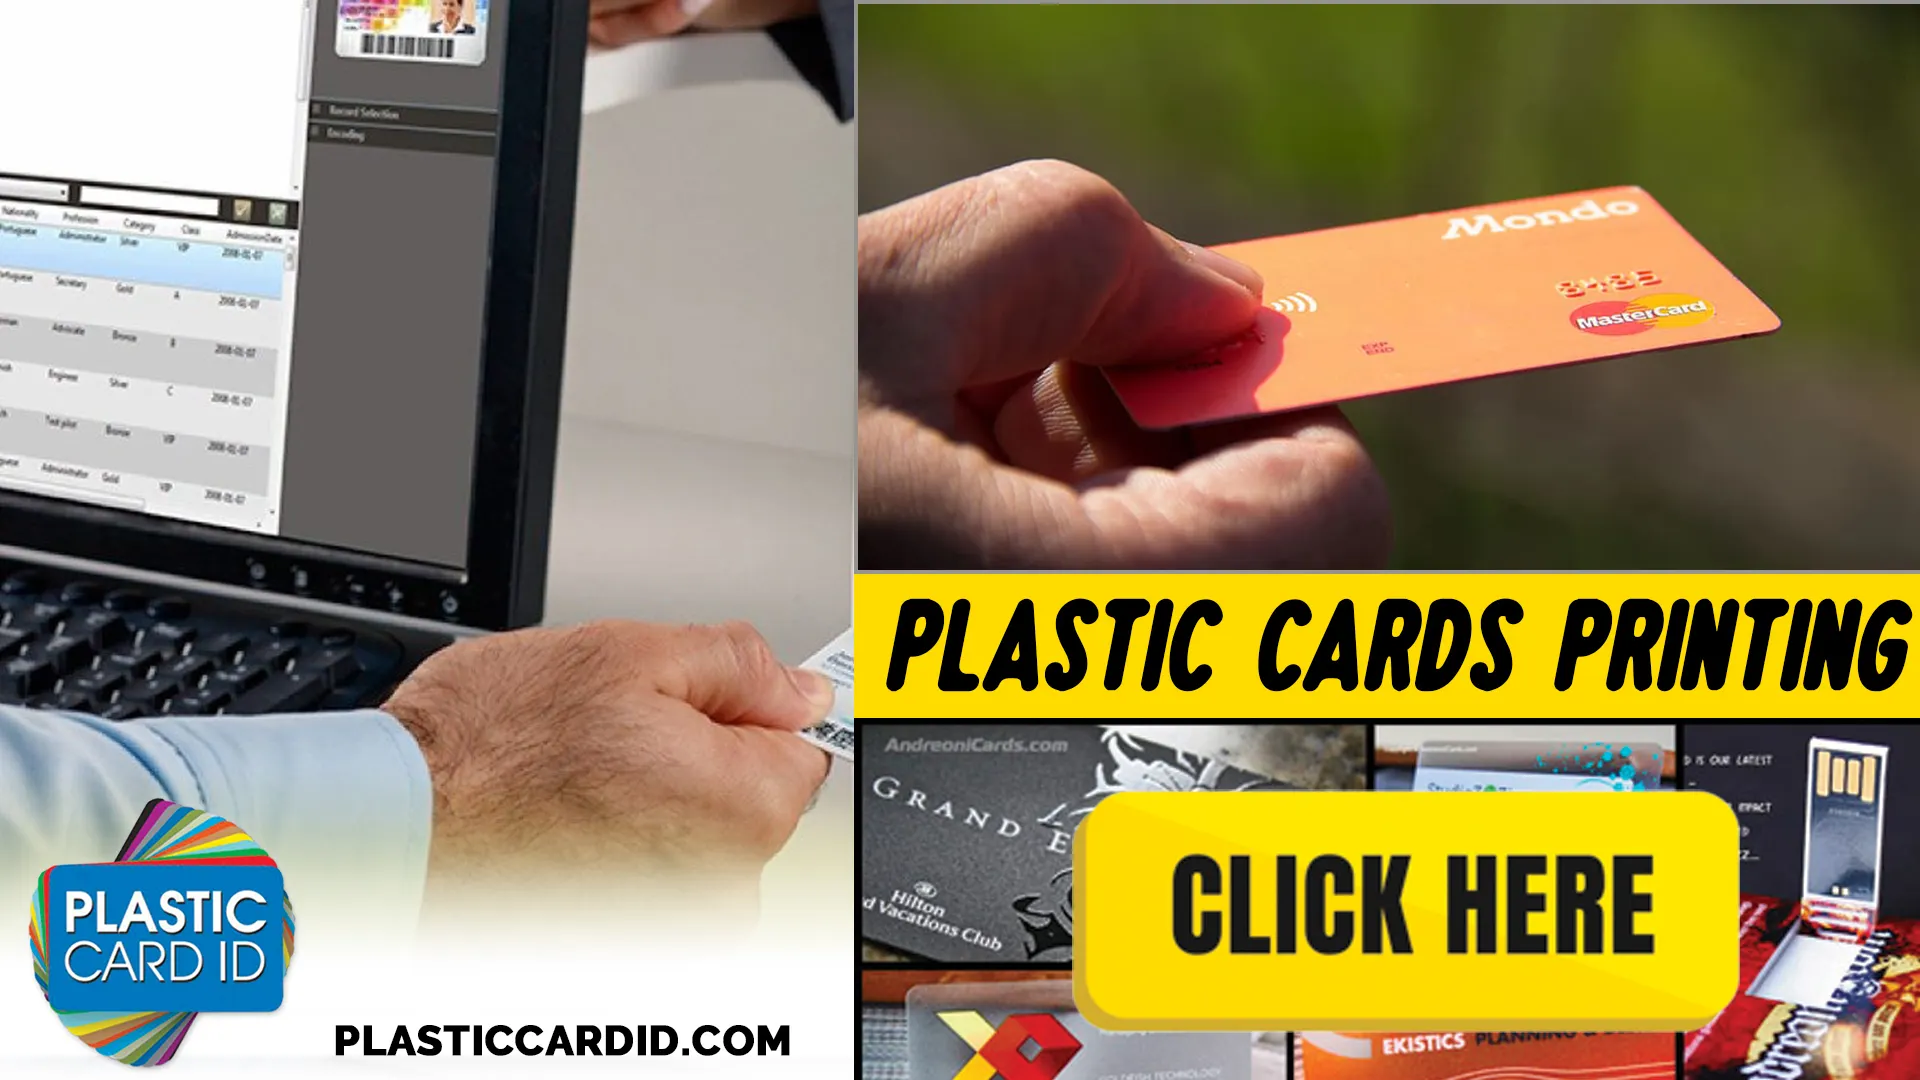 Our Product Range: NFC Cards, Printers, and More